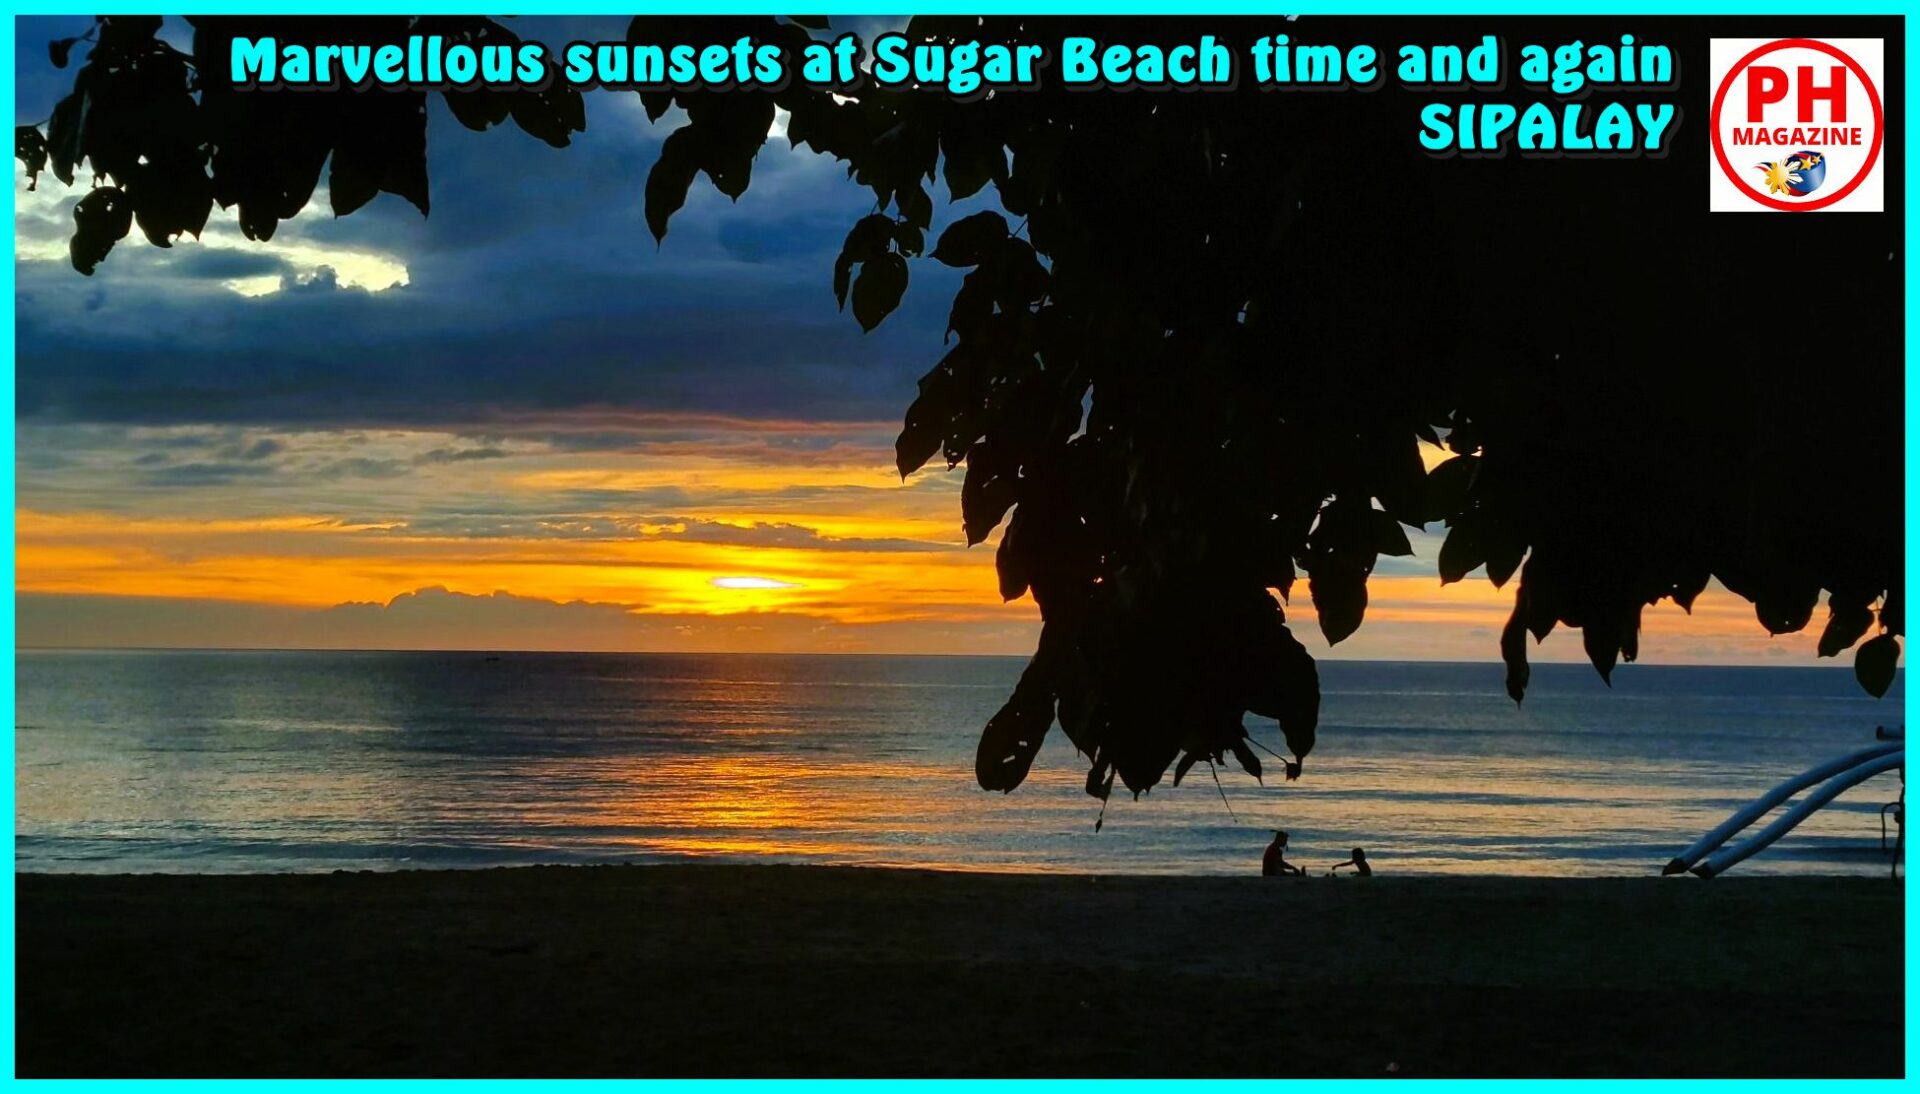 SIGHTS OF NEGROS - PHOTO OF THE DAY - One of the marvelous sunsets at Sugar Beach in Sipalay